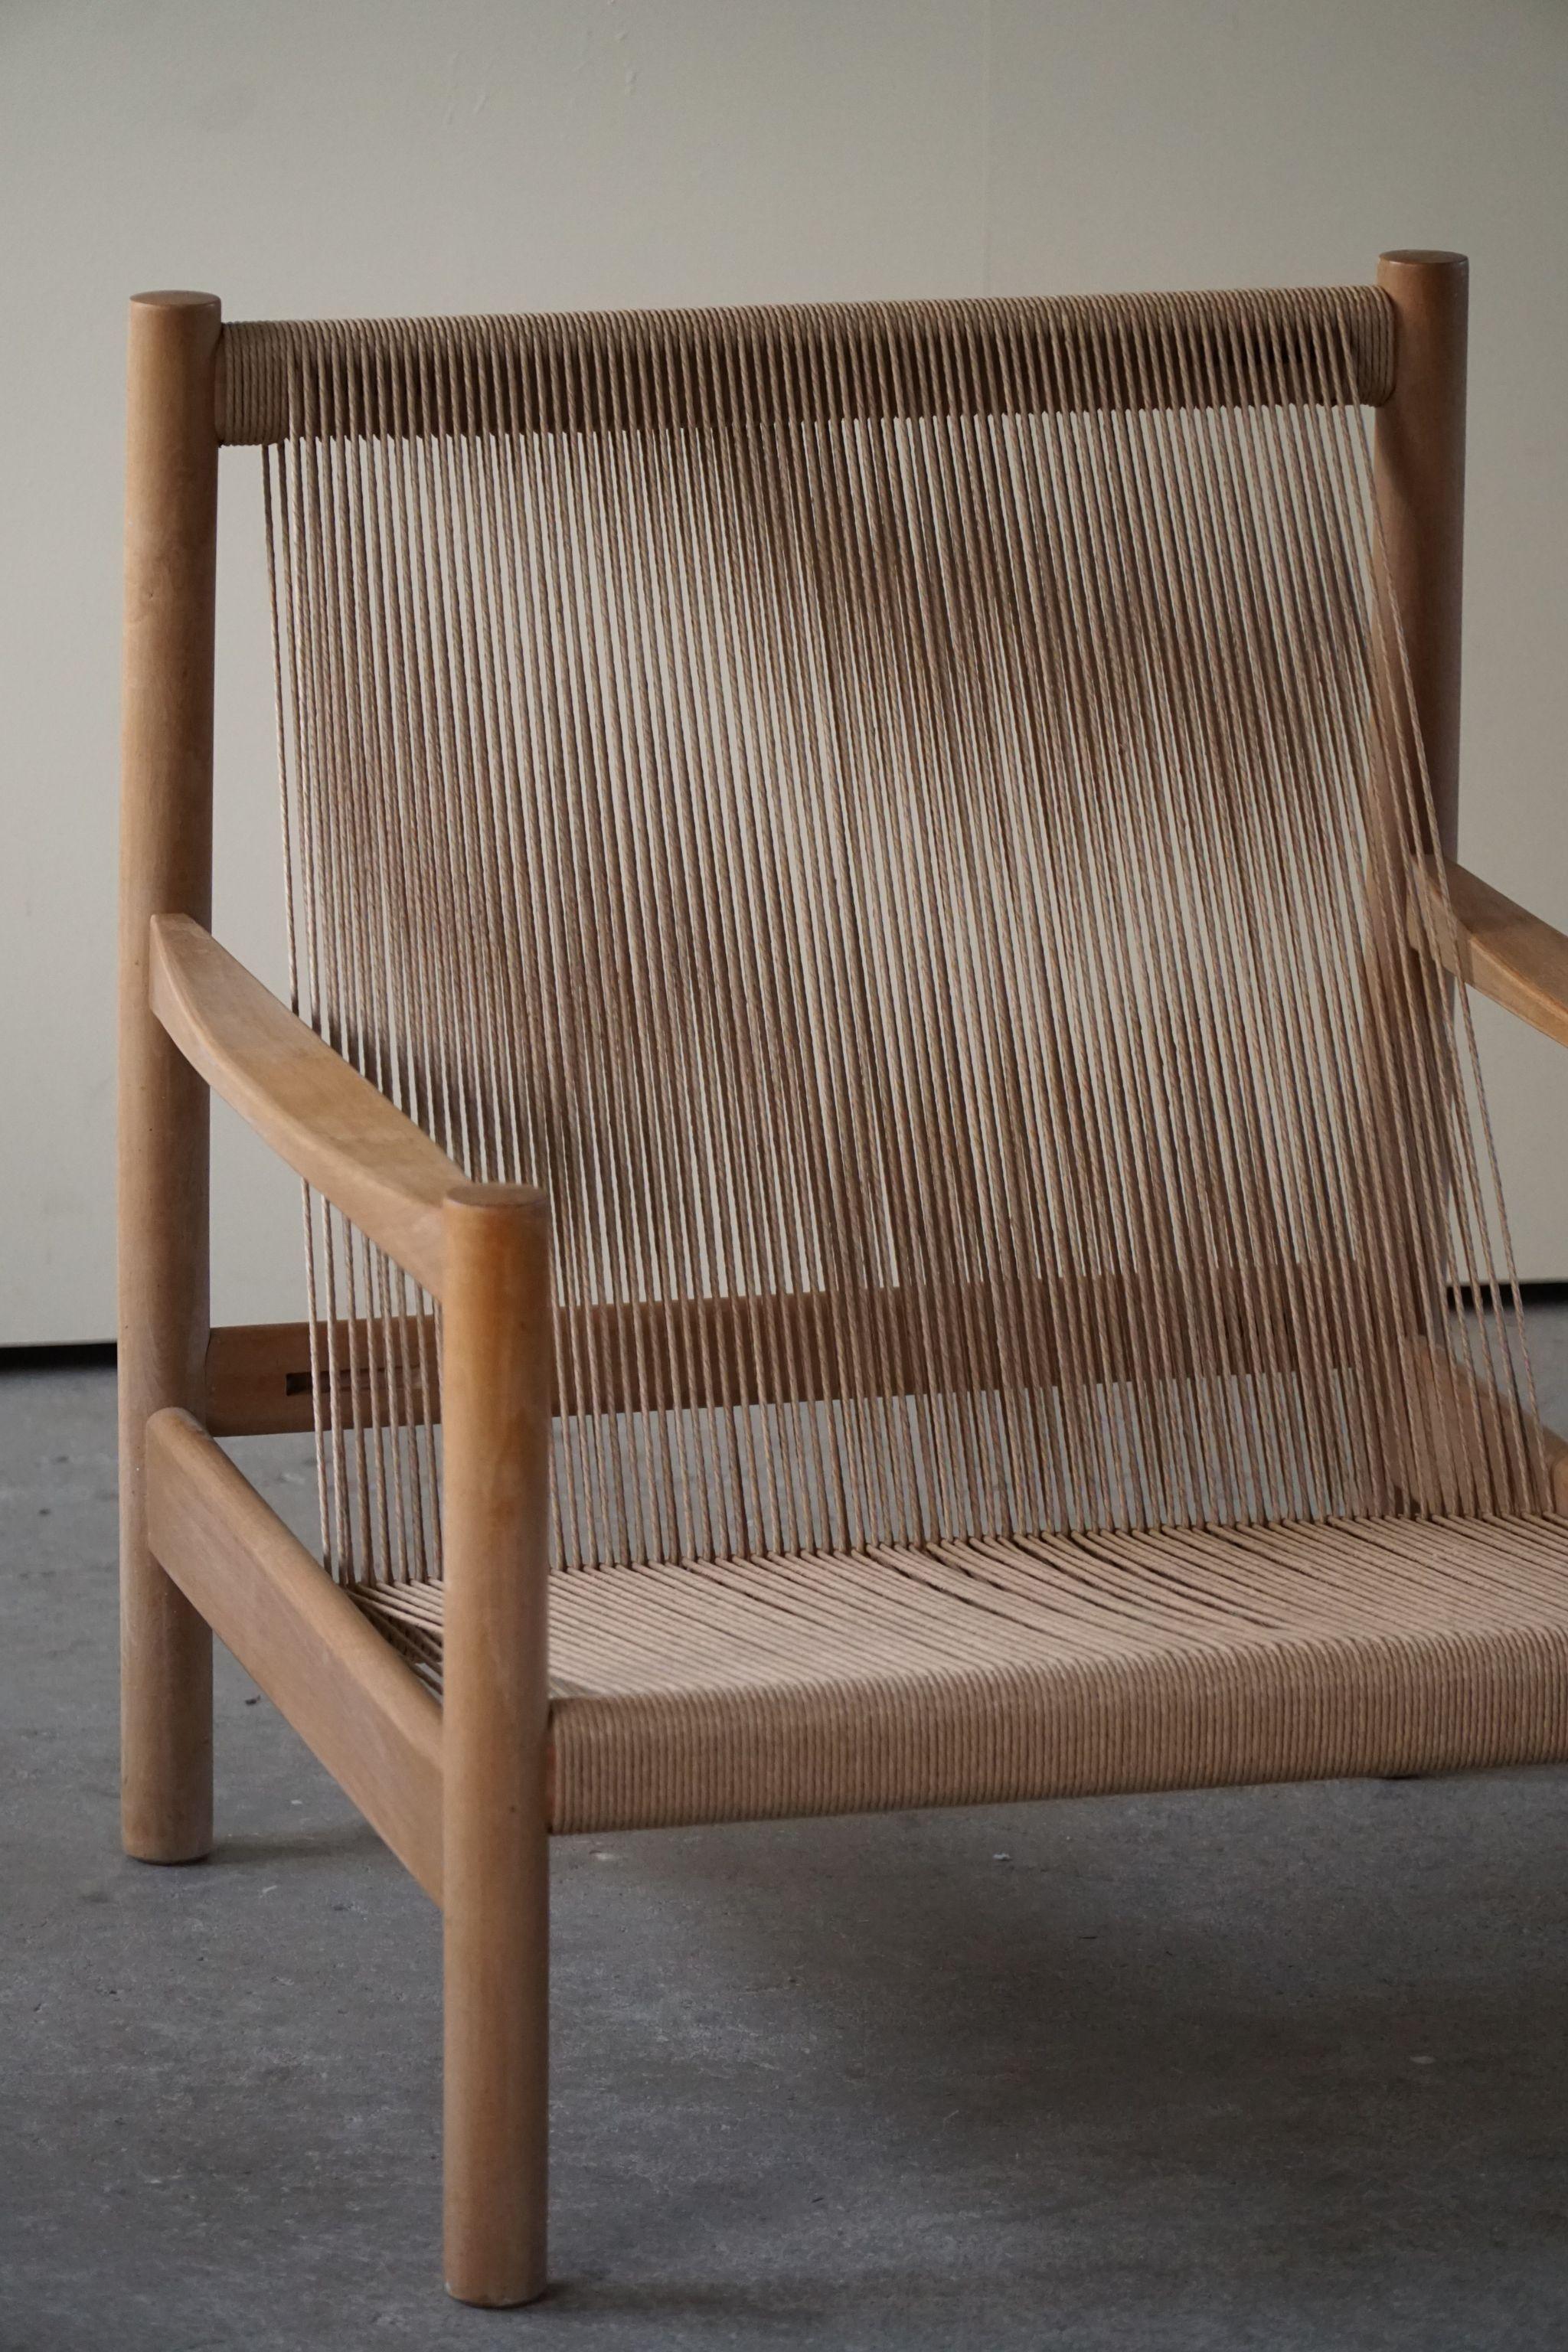 Mid-Century Modern Easy Chair with Flagline Seat & Back, Danish Cabinetmaker In Good Condition For Sale In Odense, DK